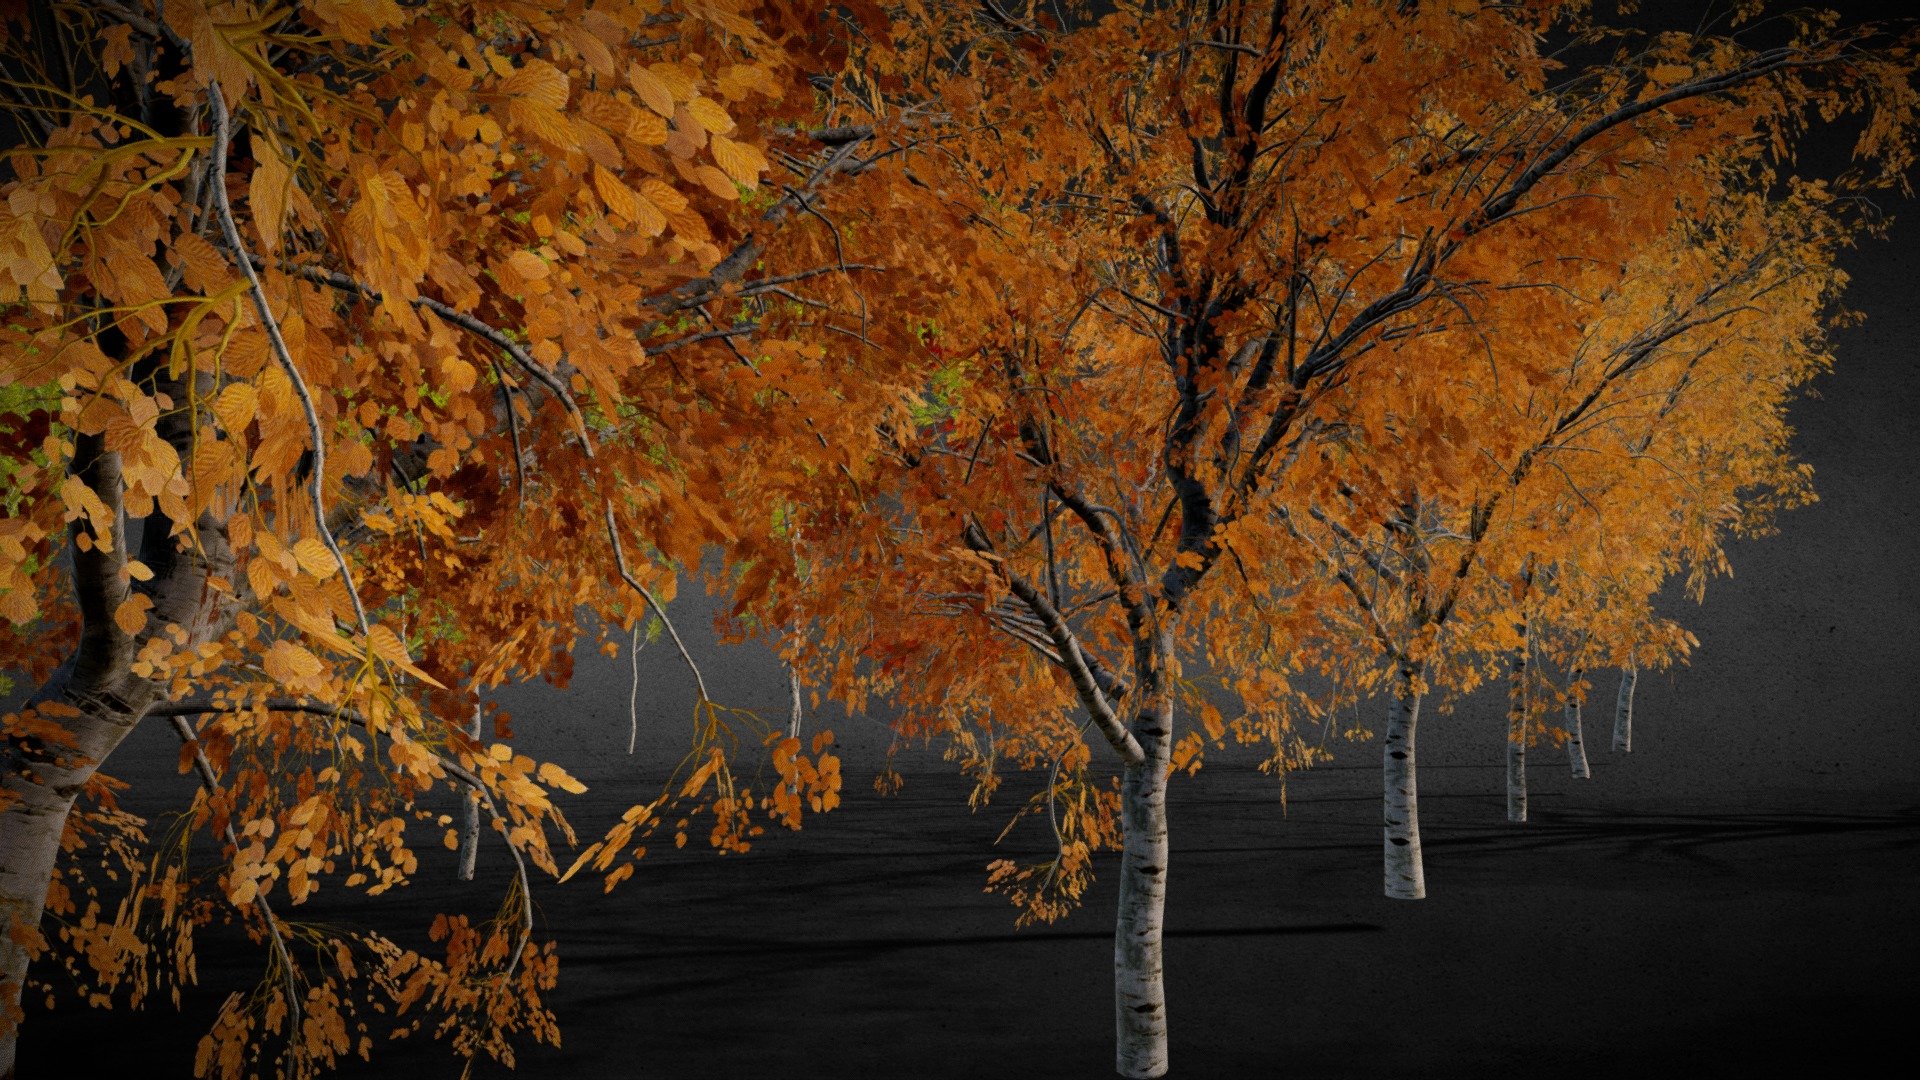 Mid/Low Poly Autumn Trees Collection with 1k and 2k Textures,you can use any bark textures you like!
Full Scene File:Click Here


All the Textures and required blend files are included in the additional Files.

The Above Full Scene File is also included in the Additional Files.

Thank you! - Mid/Low Poly Autumn Trees Collection - Buy Royalty Free 3D model by Nicholas-3D (@Nicholas01) 3d model